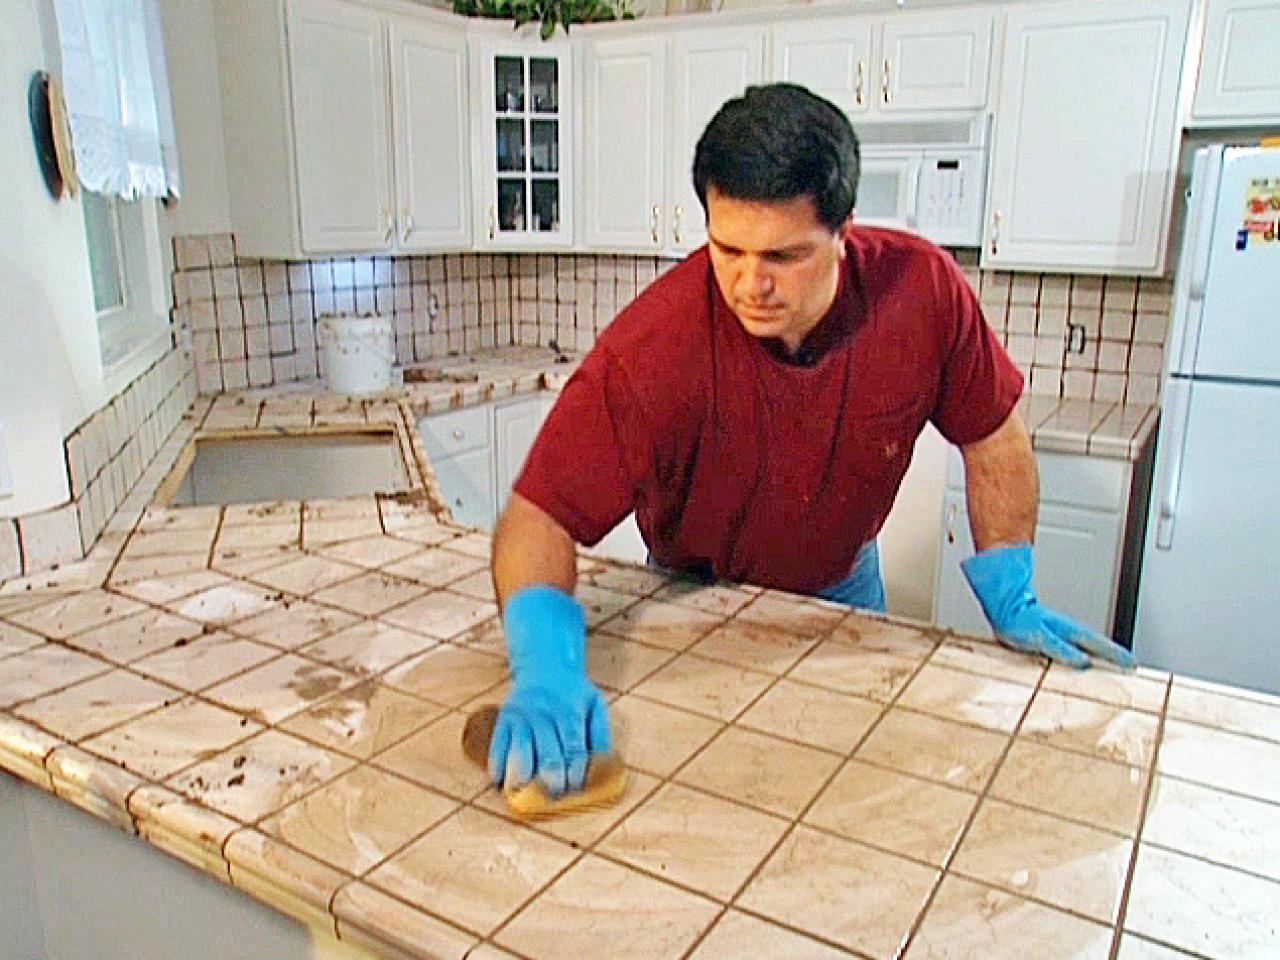 How To Remove Tile Glue From Concrete, How To Install Ceramic Tile On Countertop